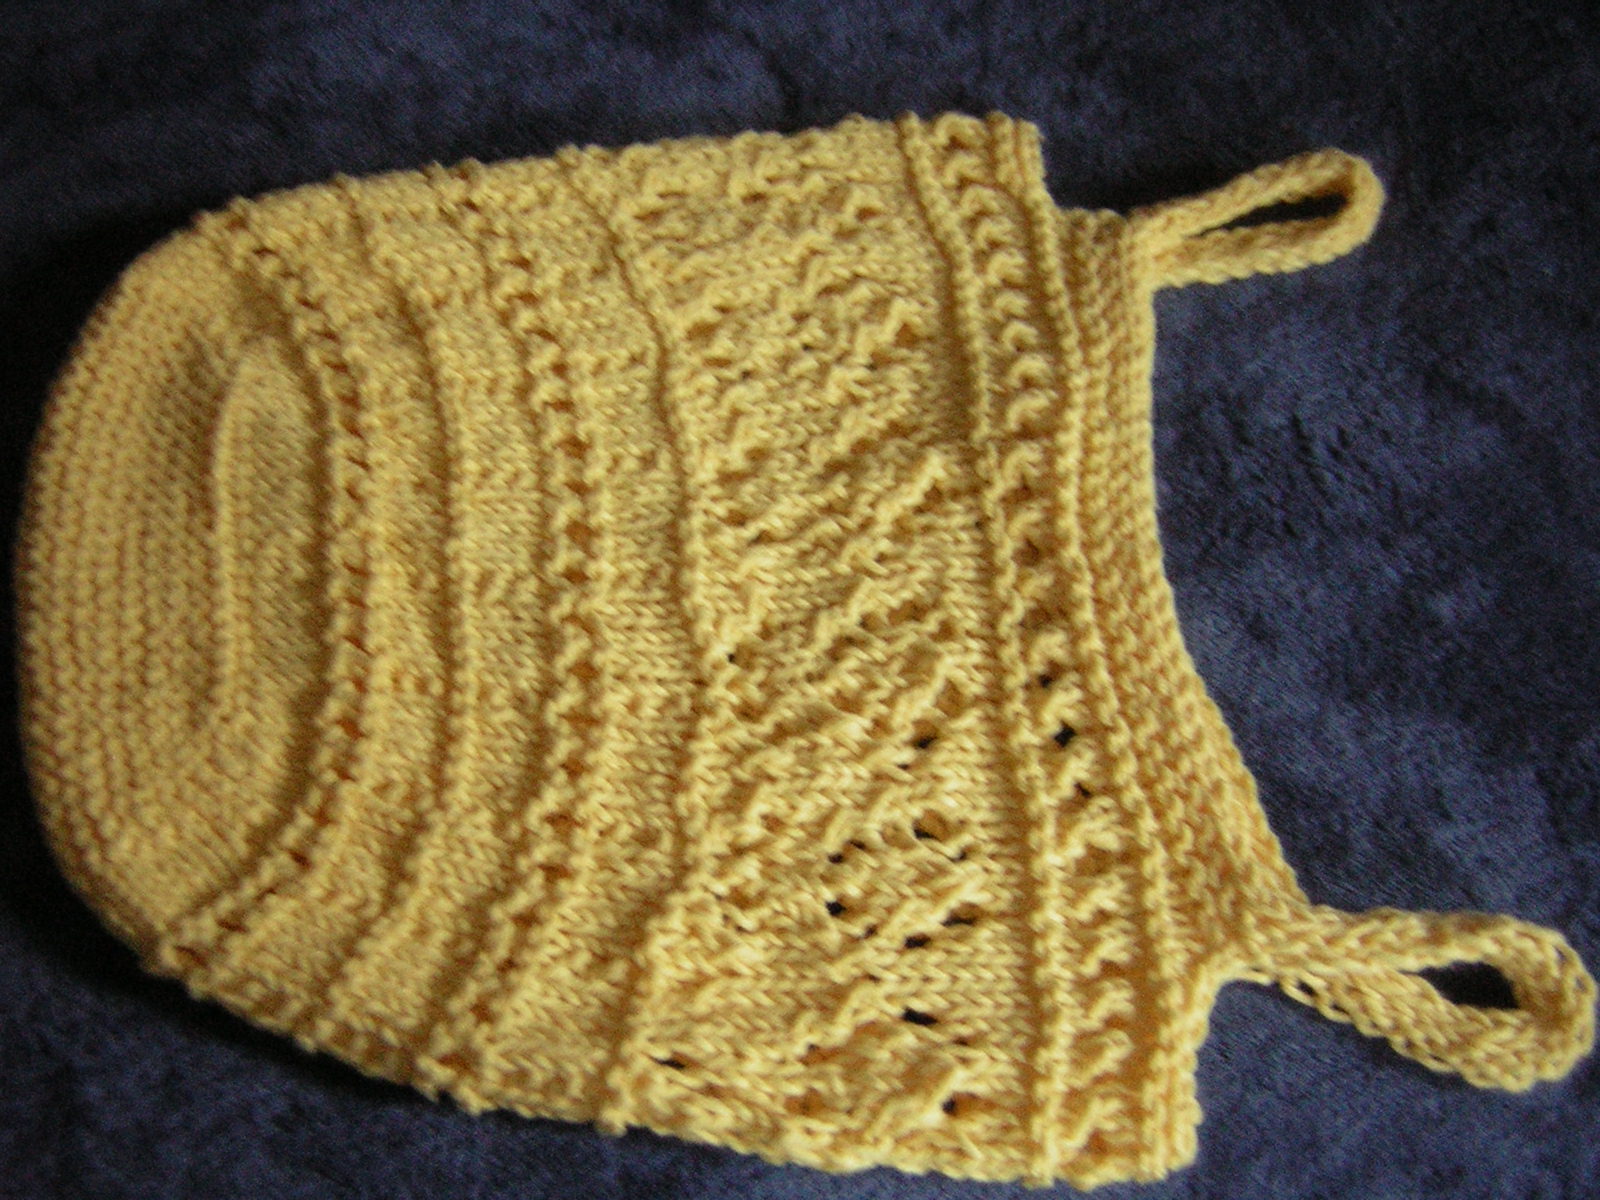 Knitting Patterns. Free knitting patterns for a variety of knit bags ...